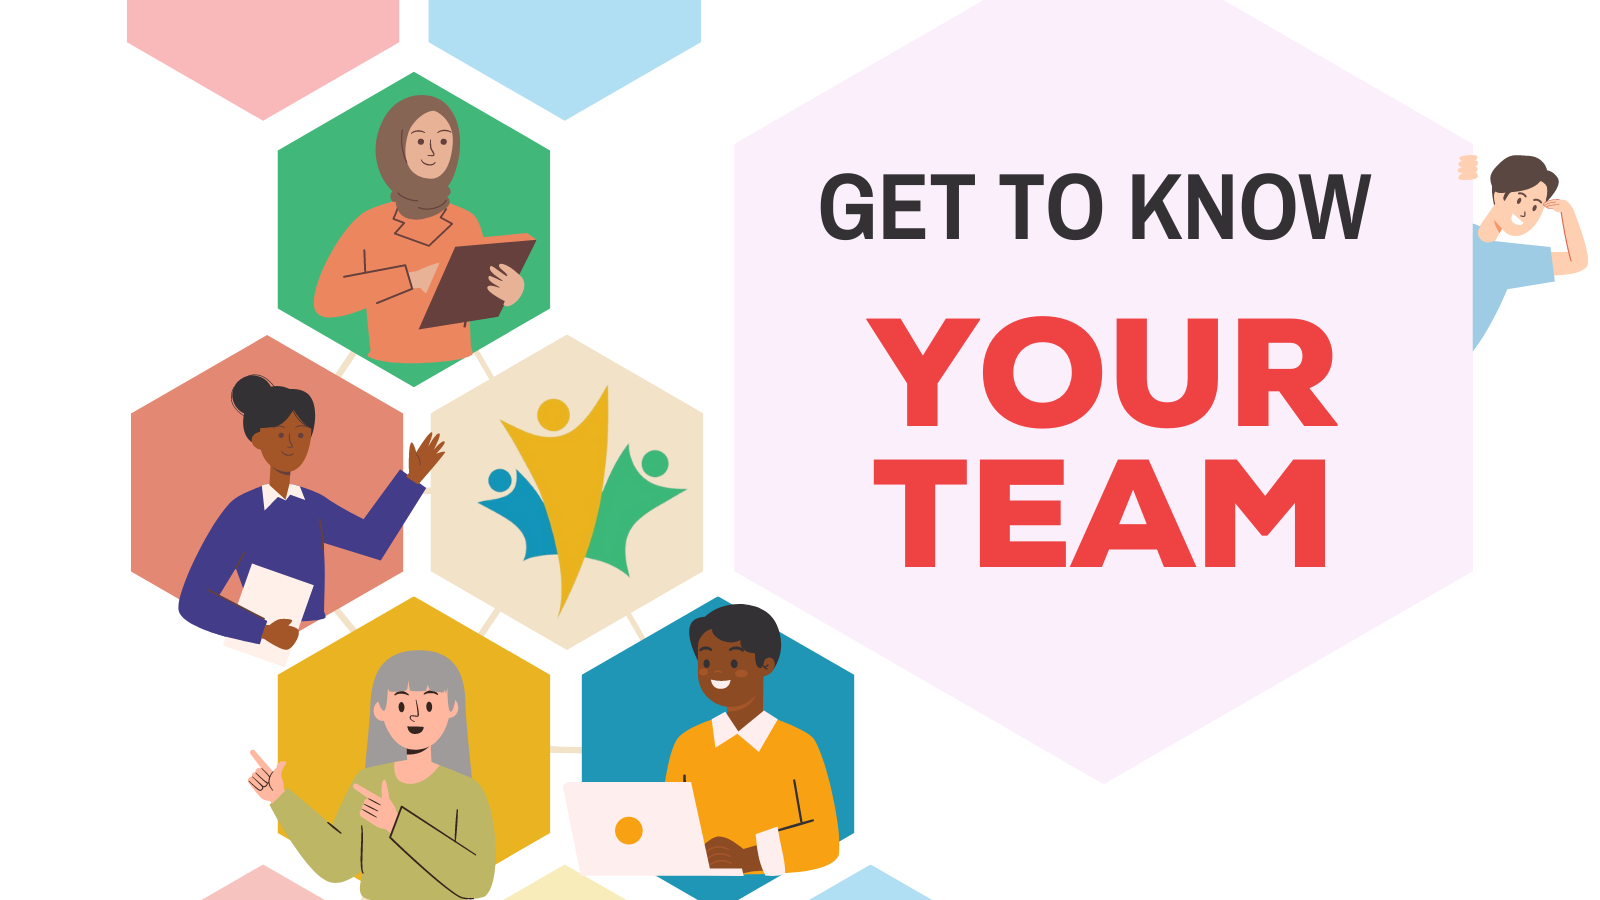 Get to know your team